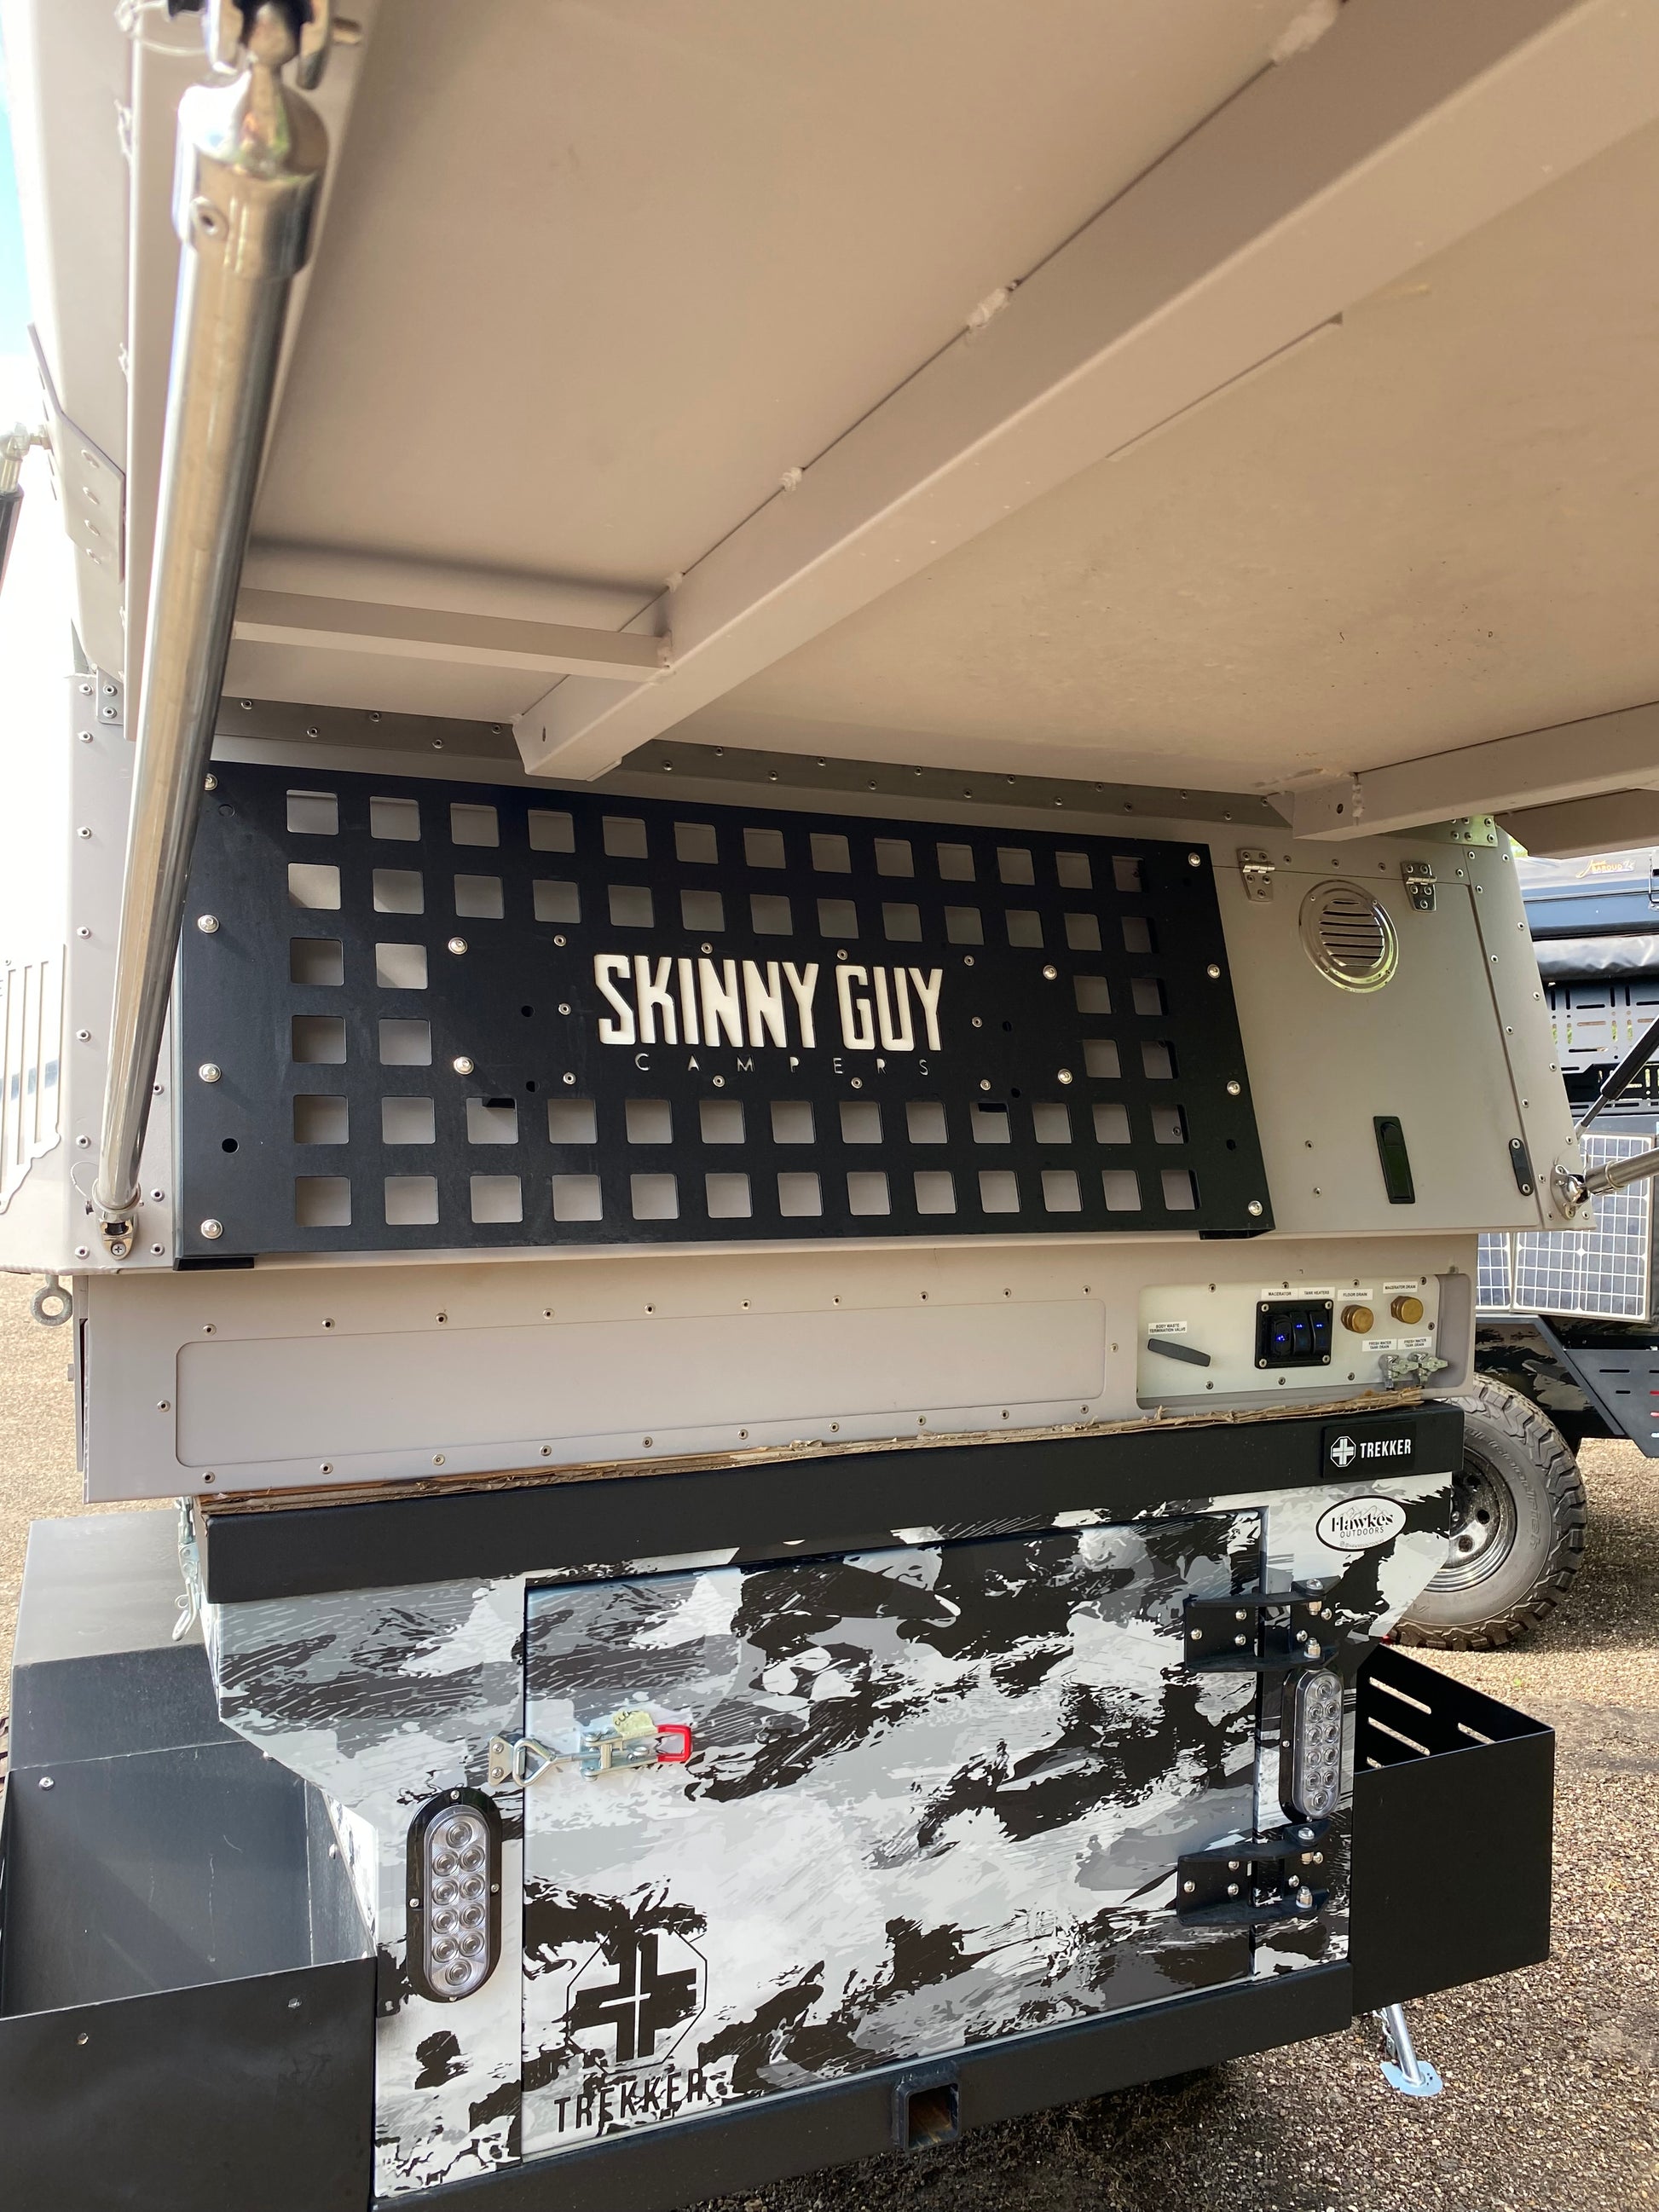 skinny guy truck bed all weather campers kit n kaboodle with outdoor kitchen and solar for sale near round rock georgetown texas at hawkes outdoors 2102512882